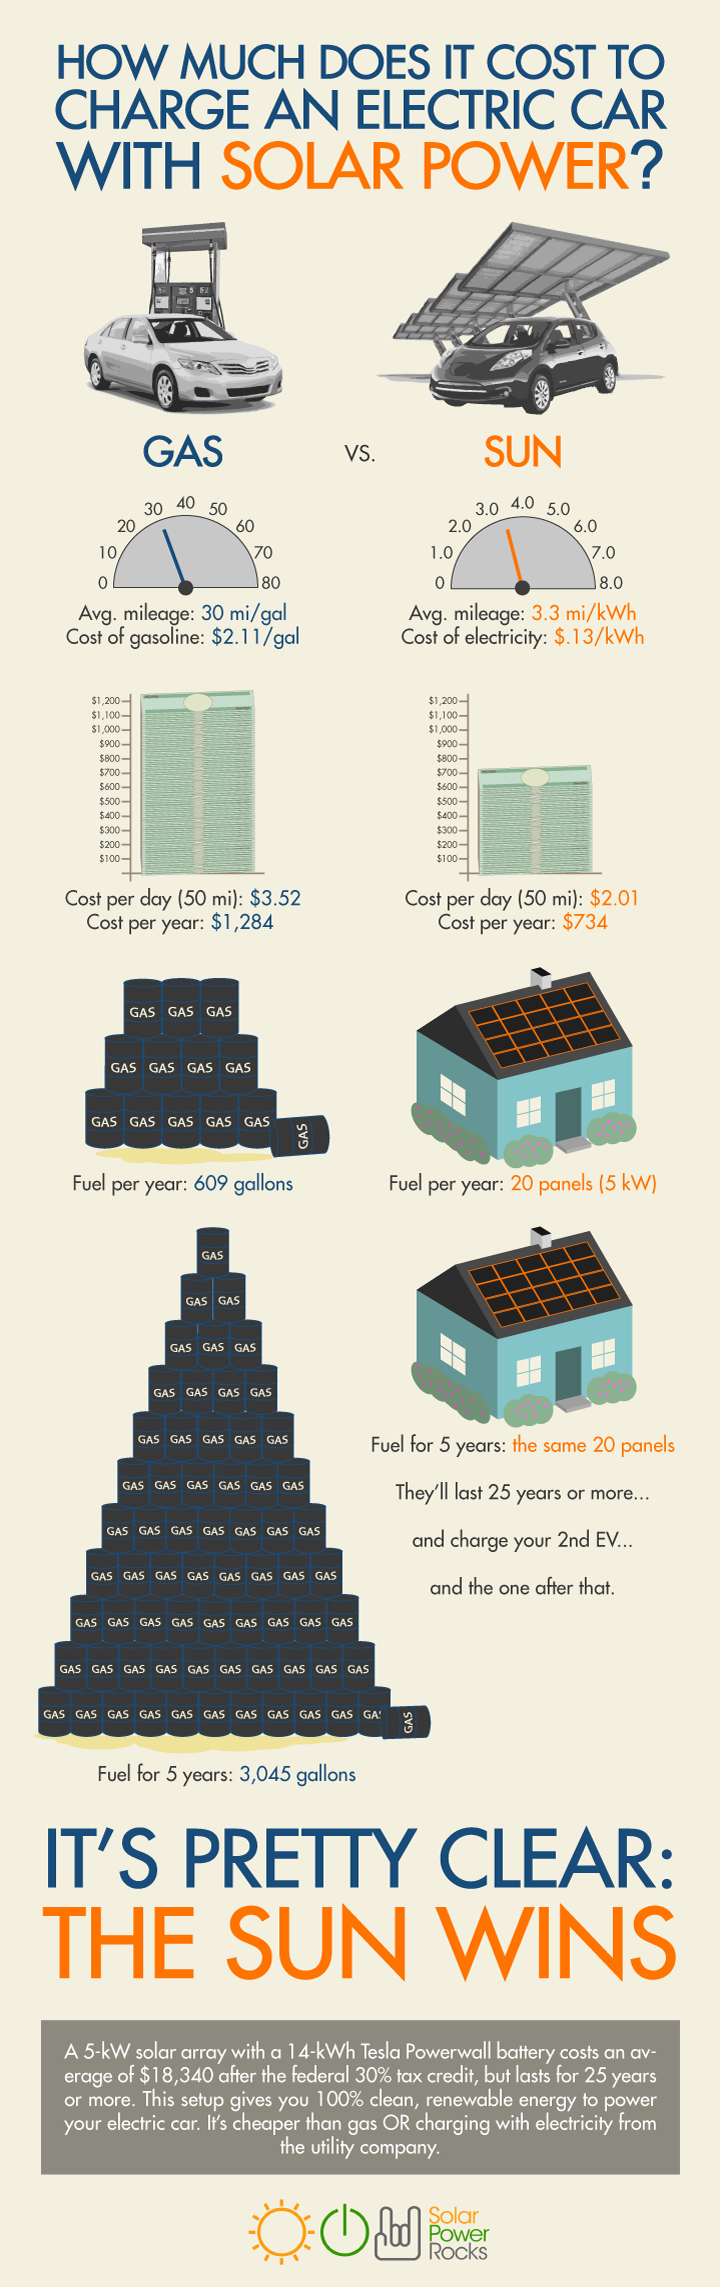 Solar Incentives Infographic - Why it